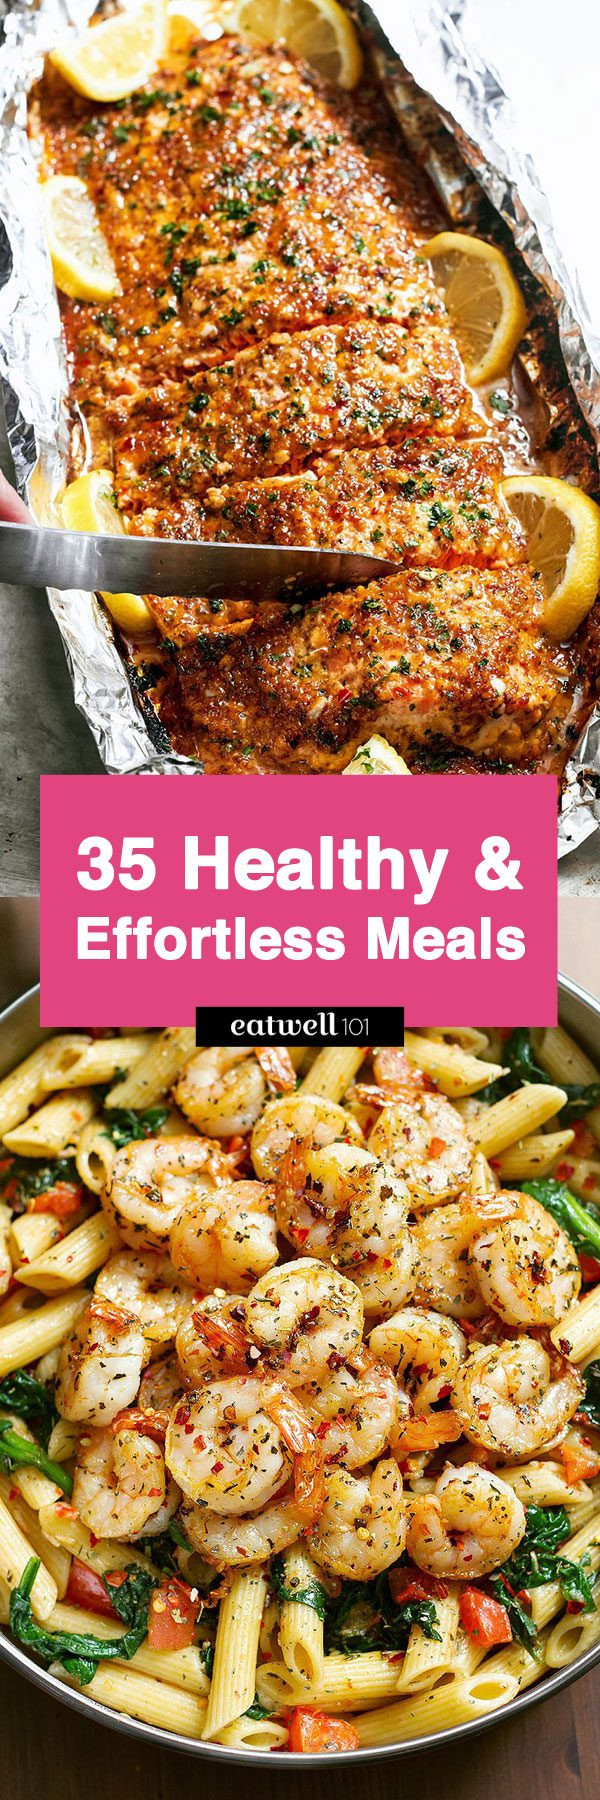 Easy Healthy Recipes For Dinner
 Easy Healthy Dinner Ideas 46 Low Effort and Healthy